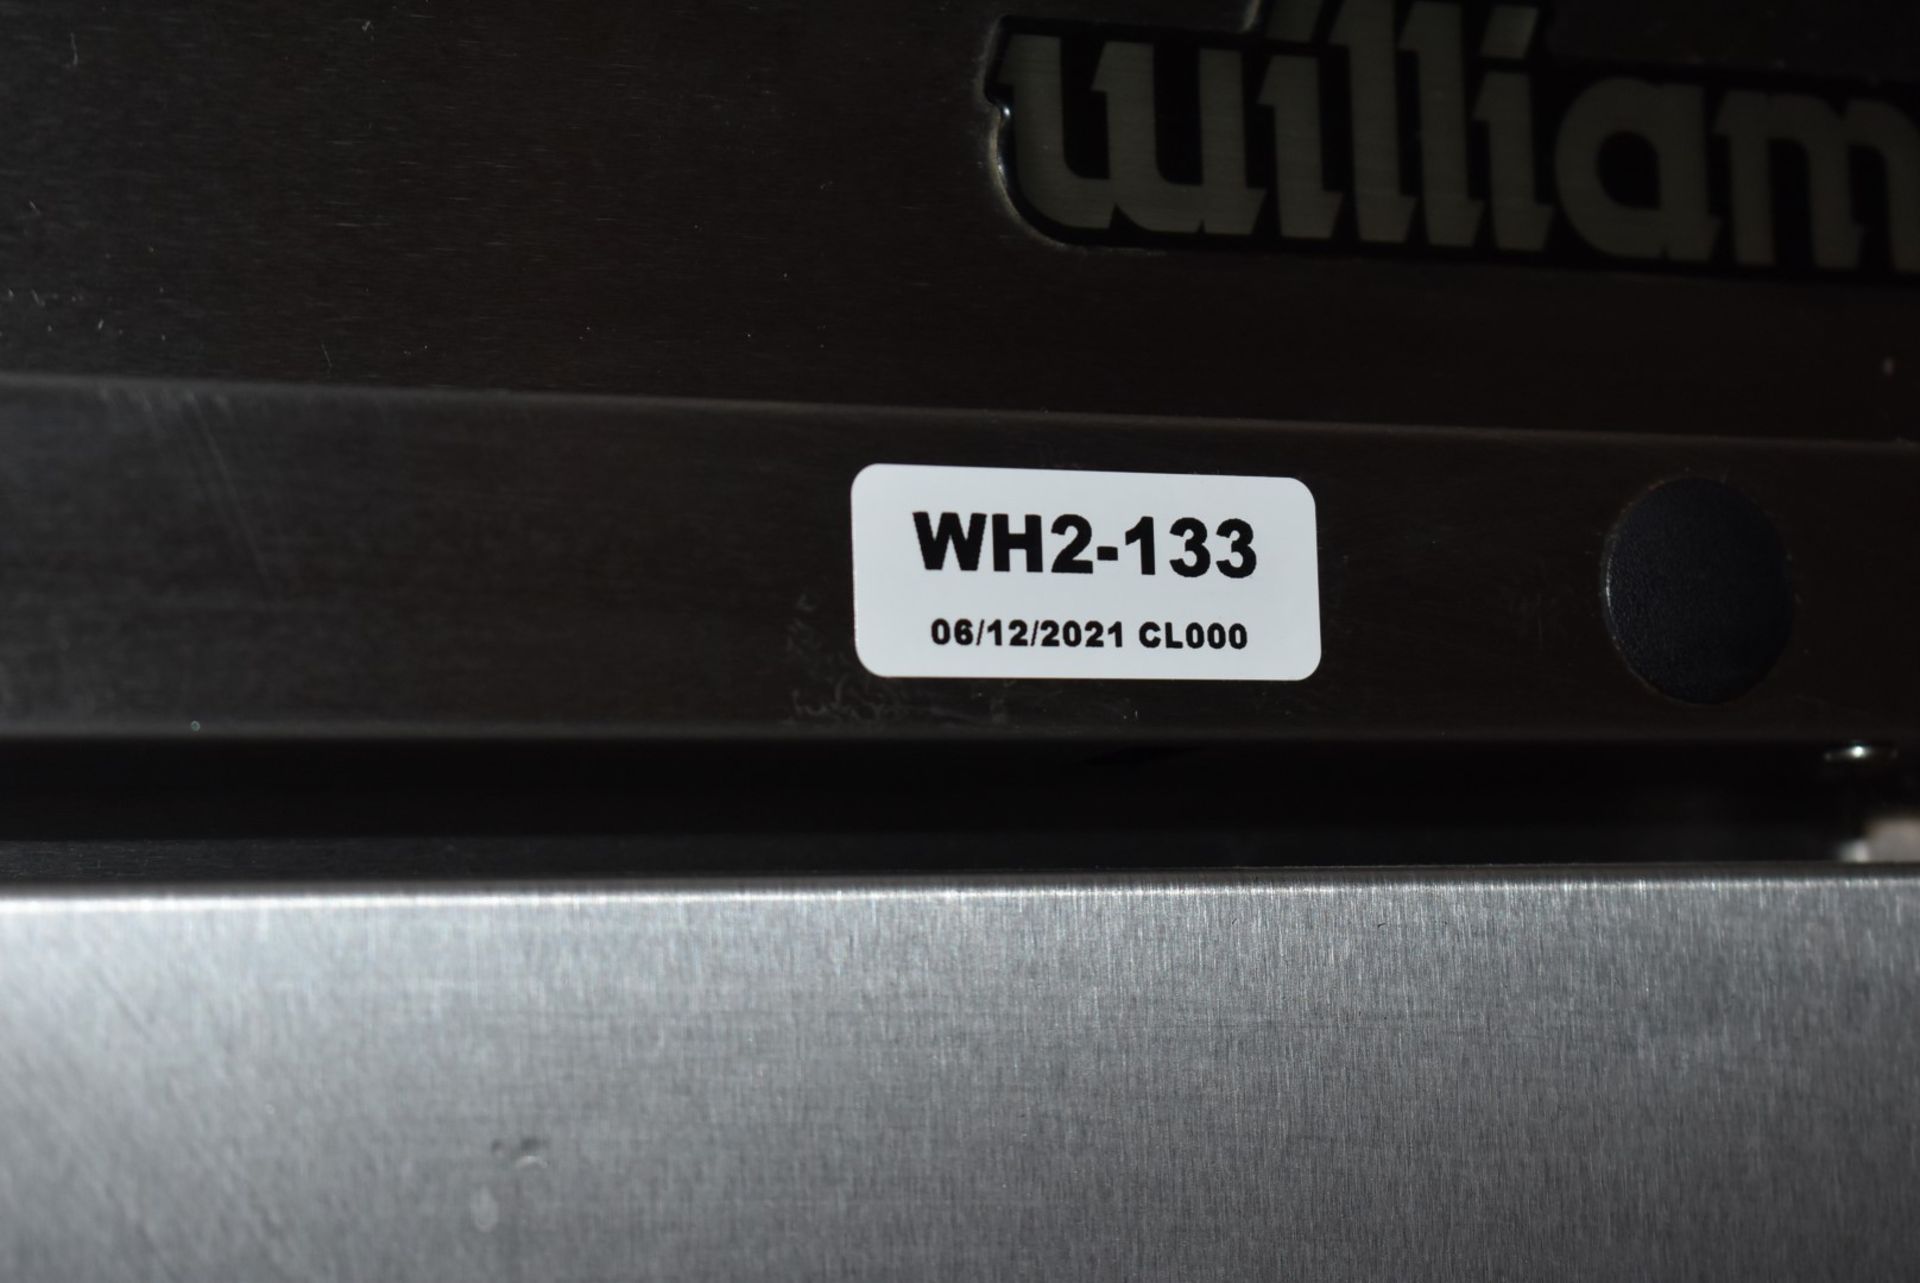 1 x Williams Upright Single Door Refrigerator With Stainless Steel Exterior - Model HJ1SA - Recently - Image 11 of 11